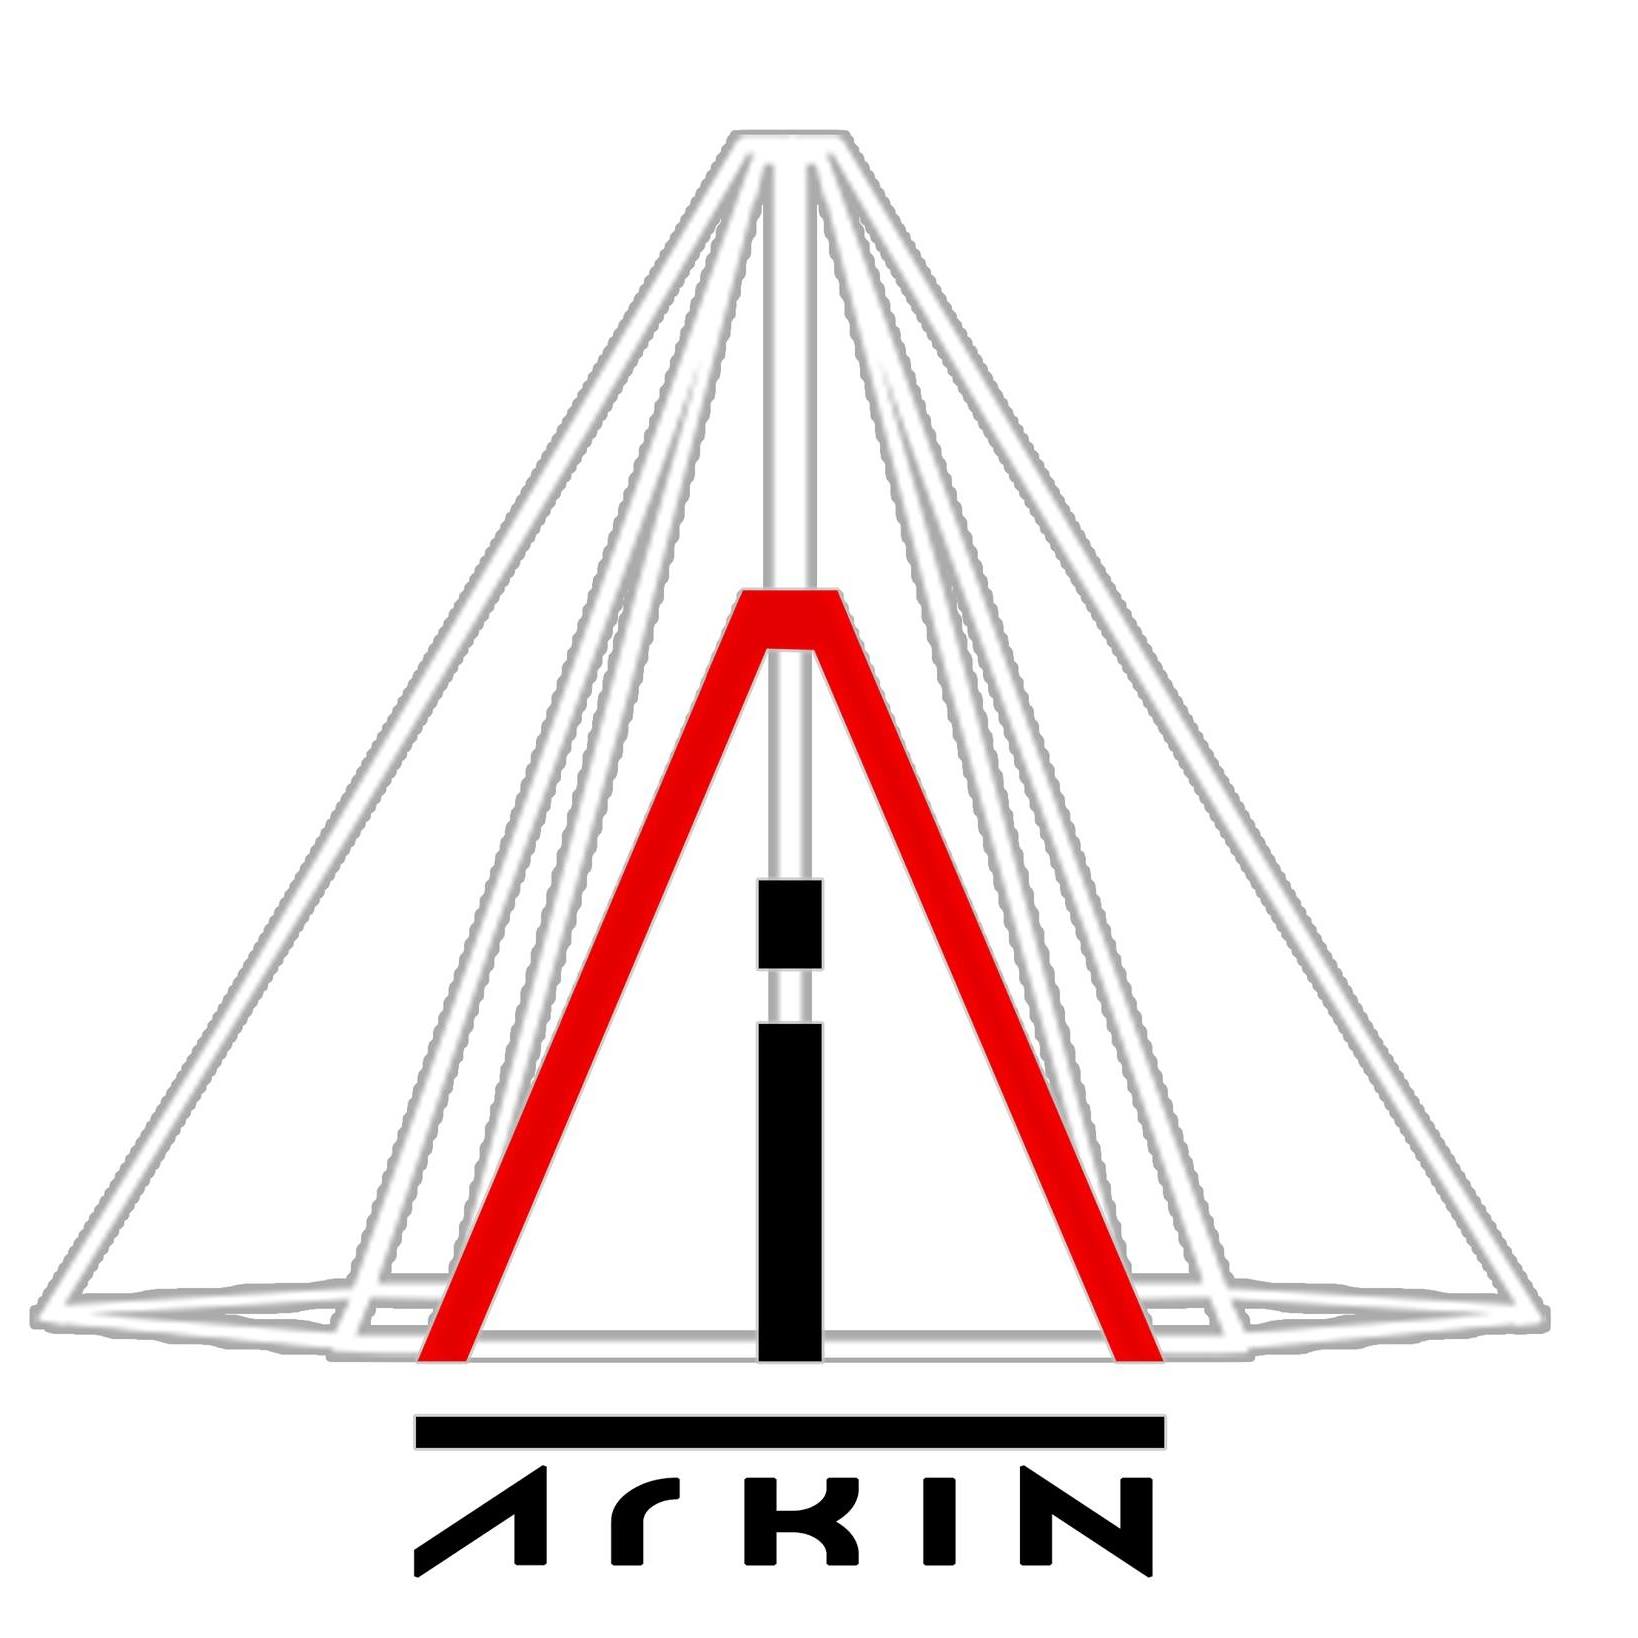 Arkin for Architectural & Interiors|Legal Services|Professional Services